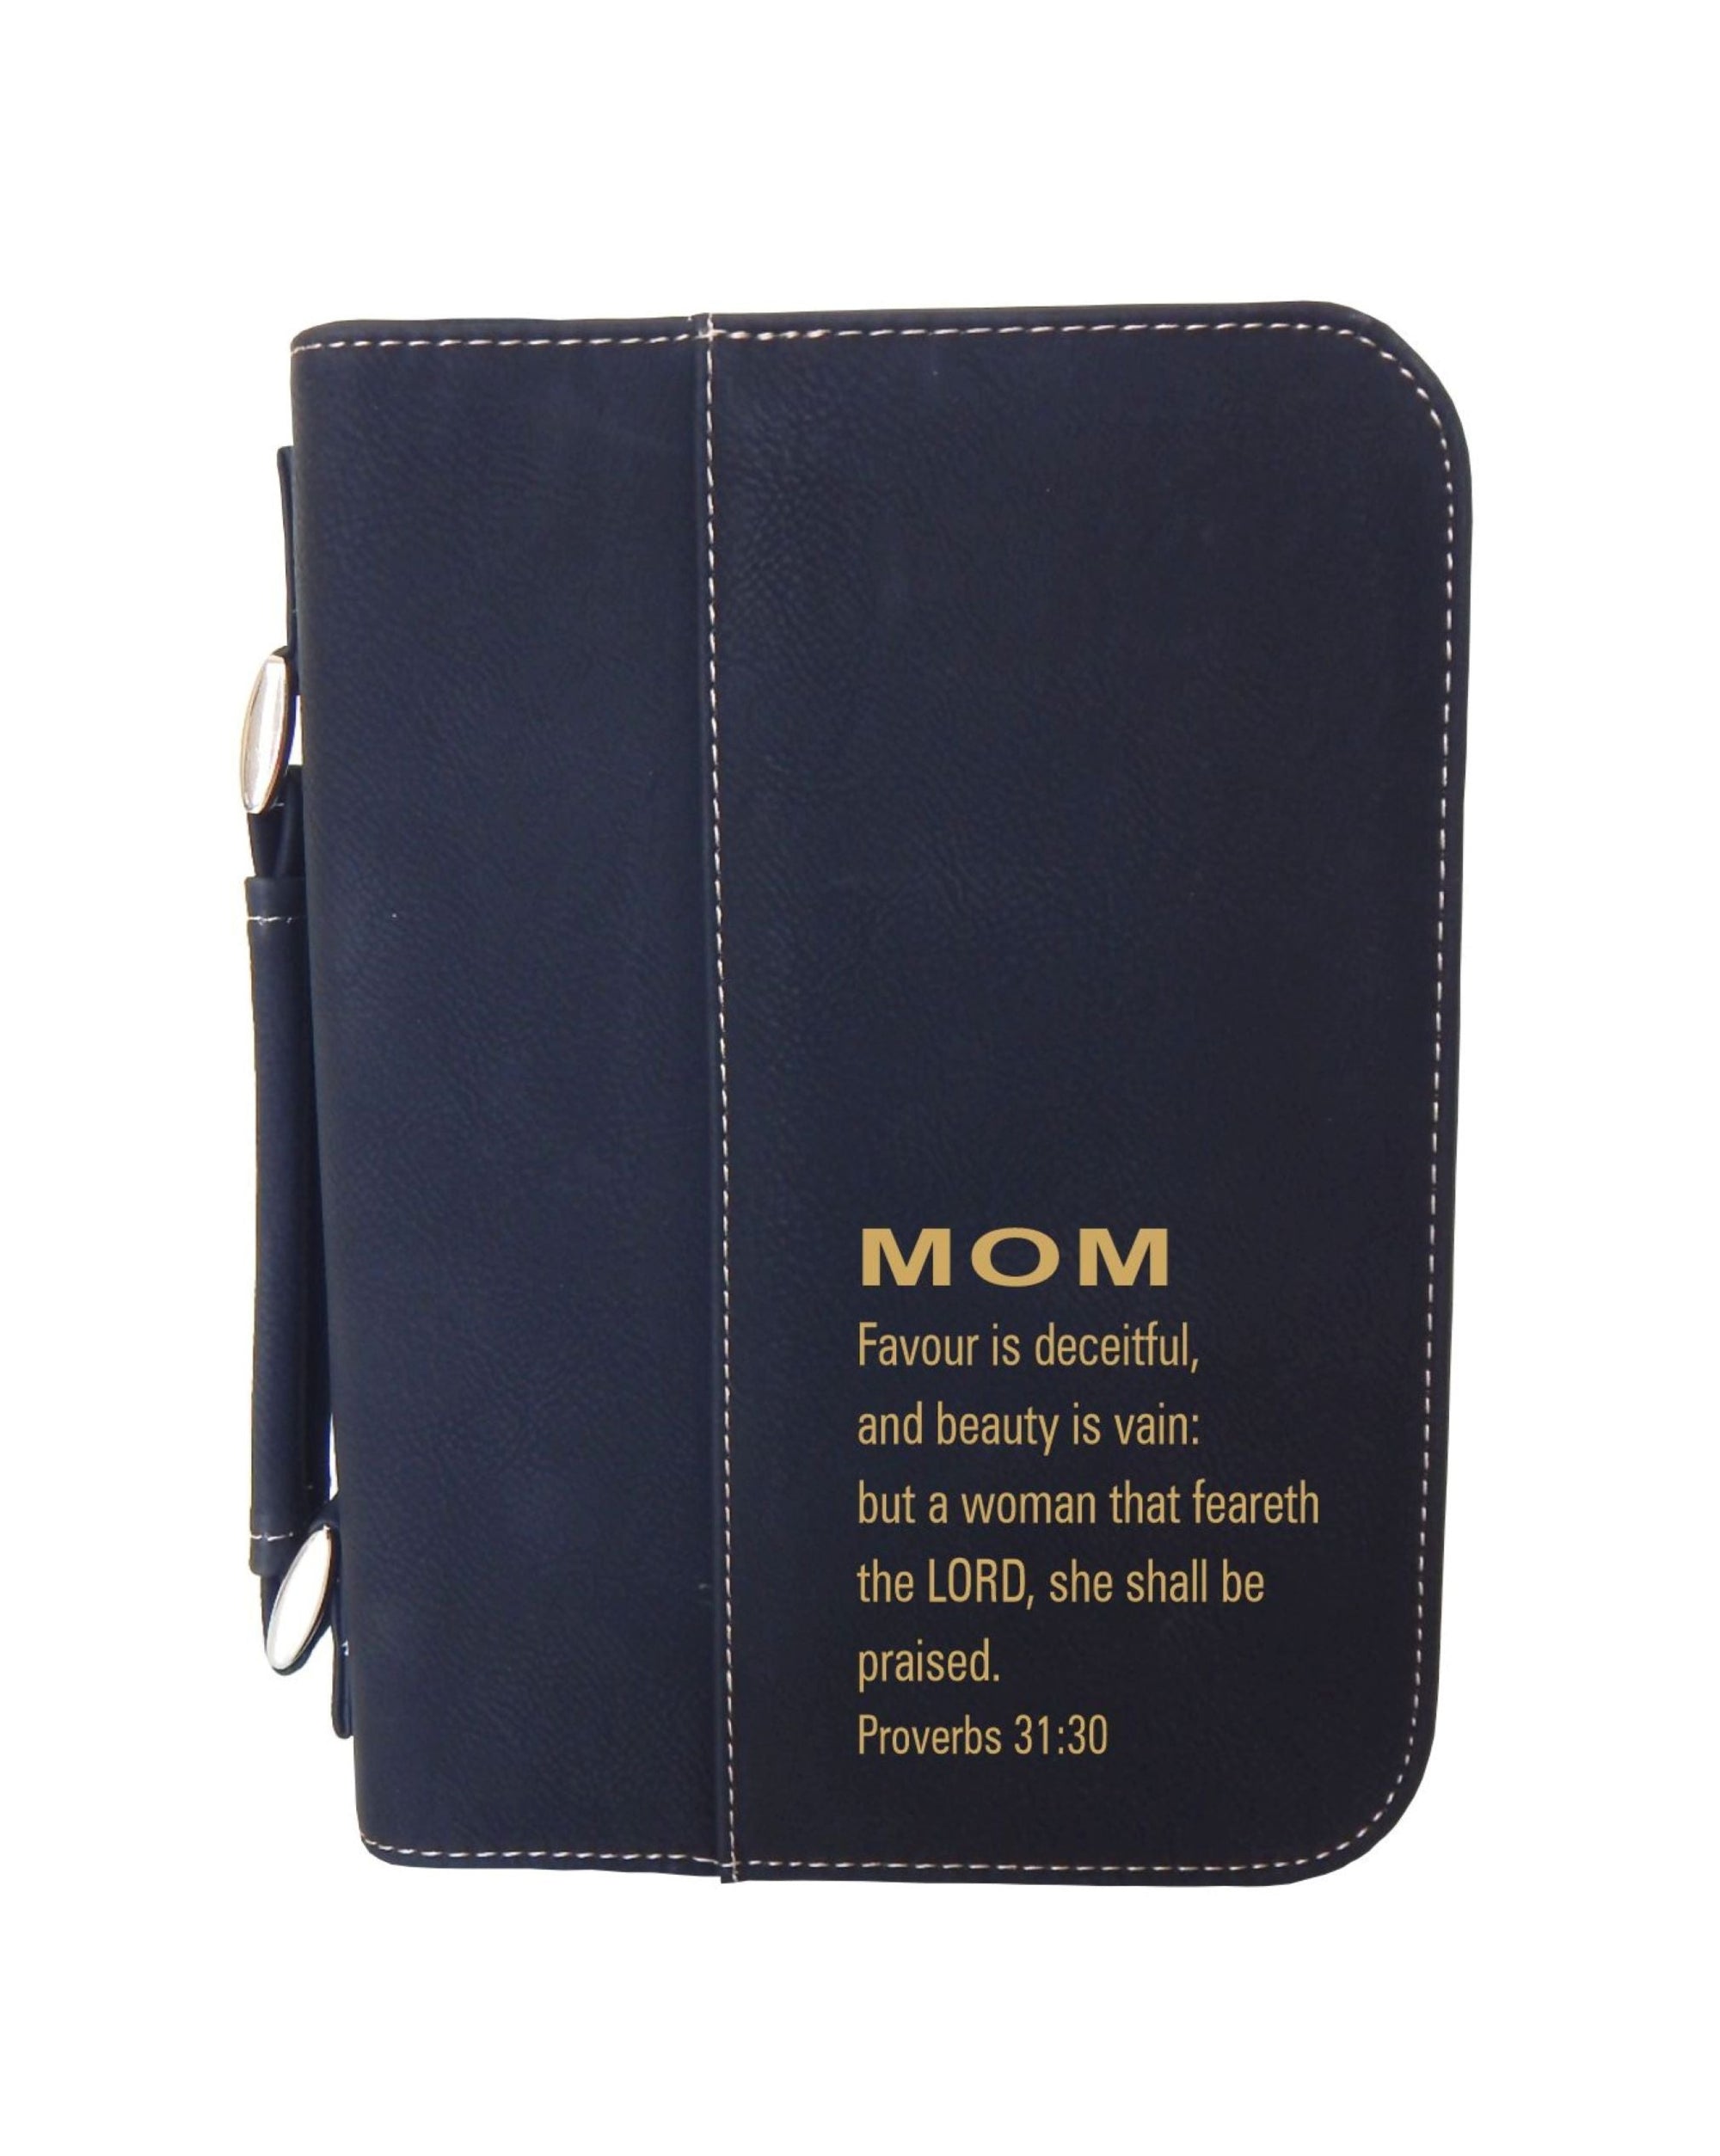 Religious Gift for Mom | Christian Gift for Her | Mother's Day Bible Cover BCL038